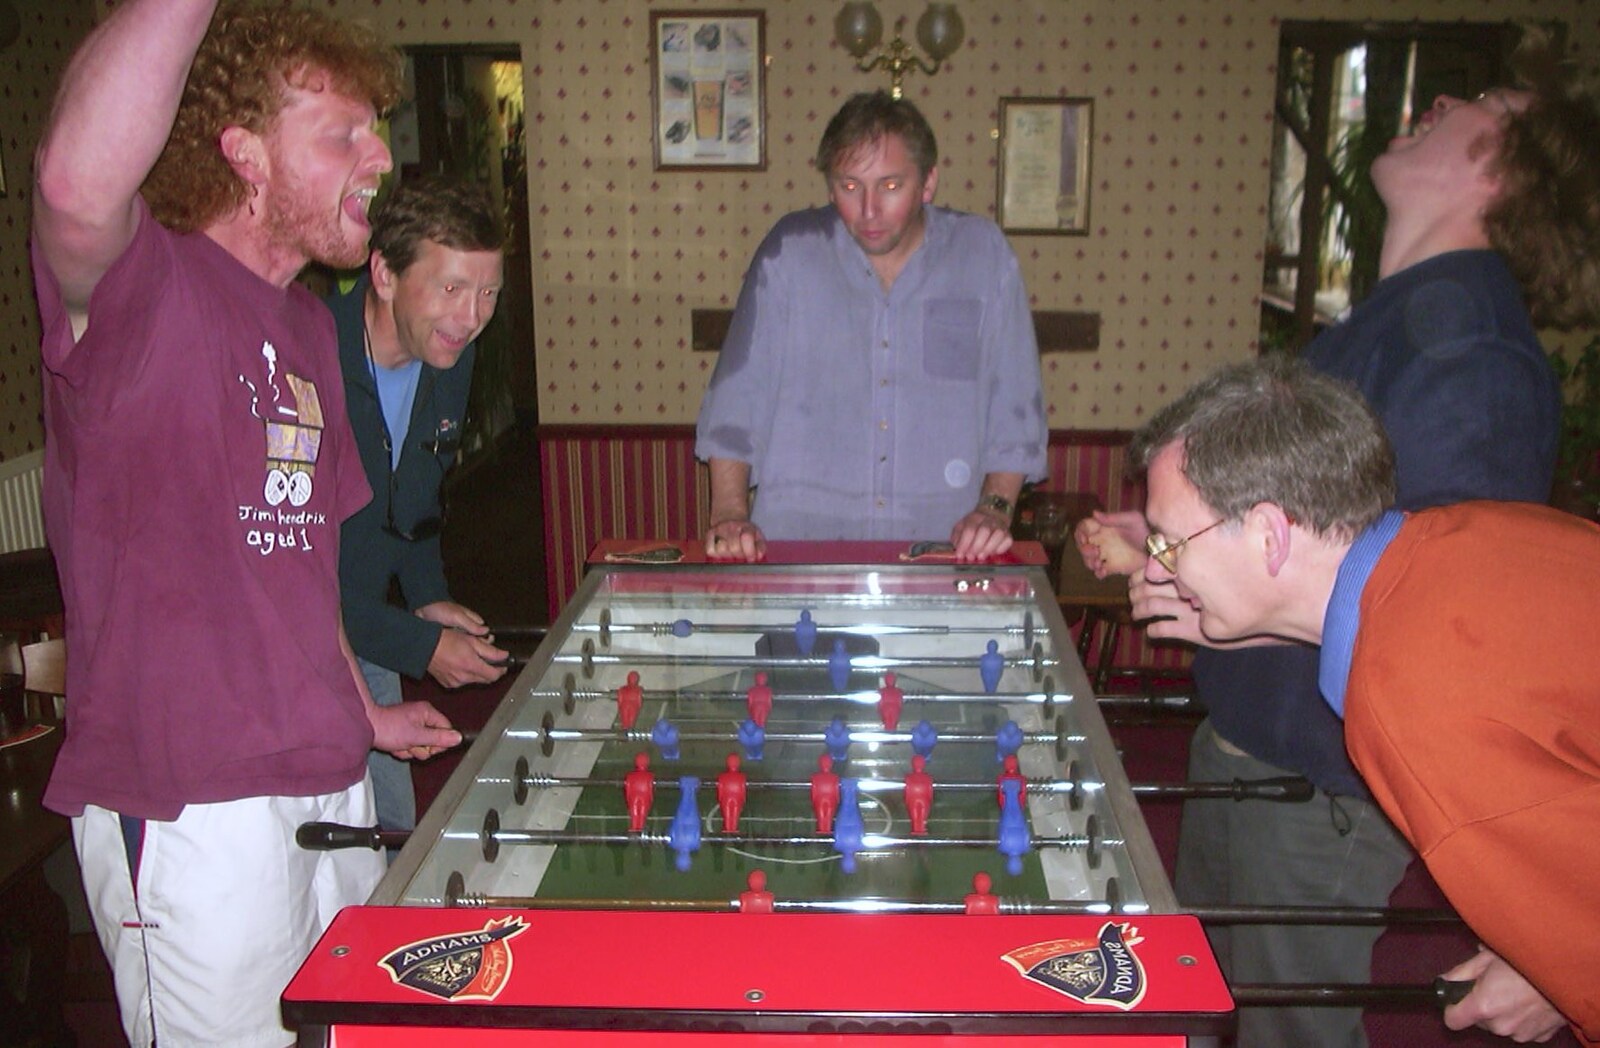 A Rainy Barbeque at the Swan Inn, Brome, Suffolk - 15th June 2002: Wavy wins a point on table football